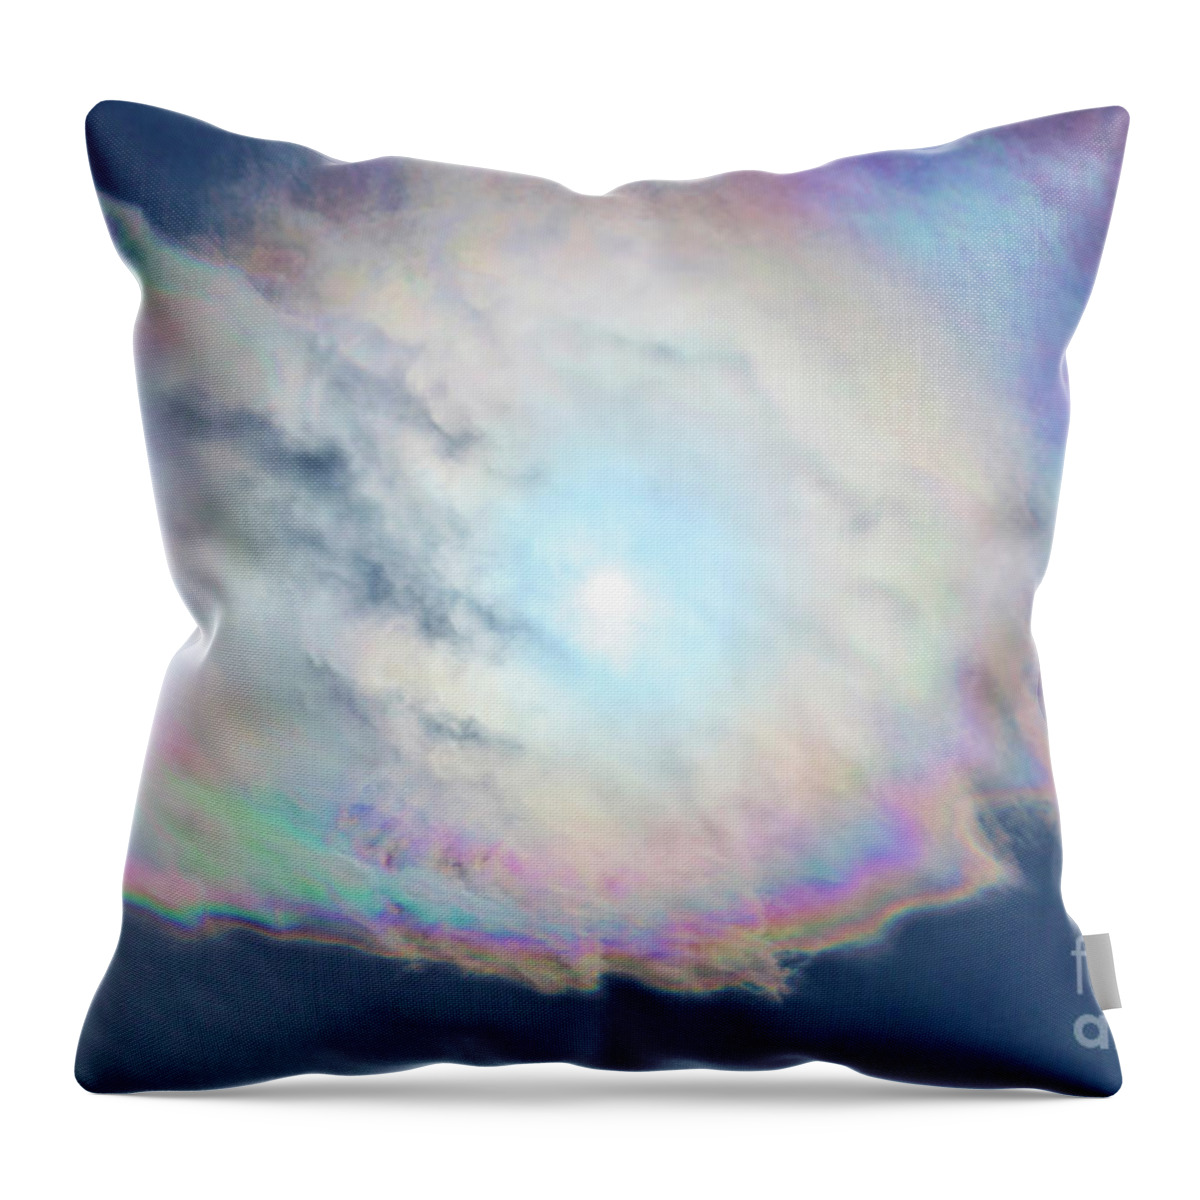 Anomaly Throw Pillow featuring the photograph Cloud Iridescence by Martin Konopacki